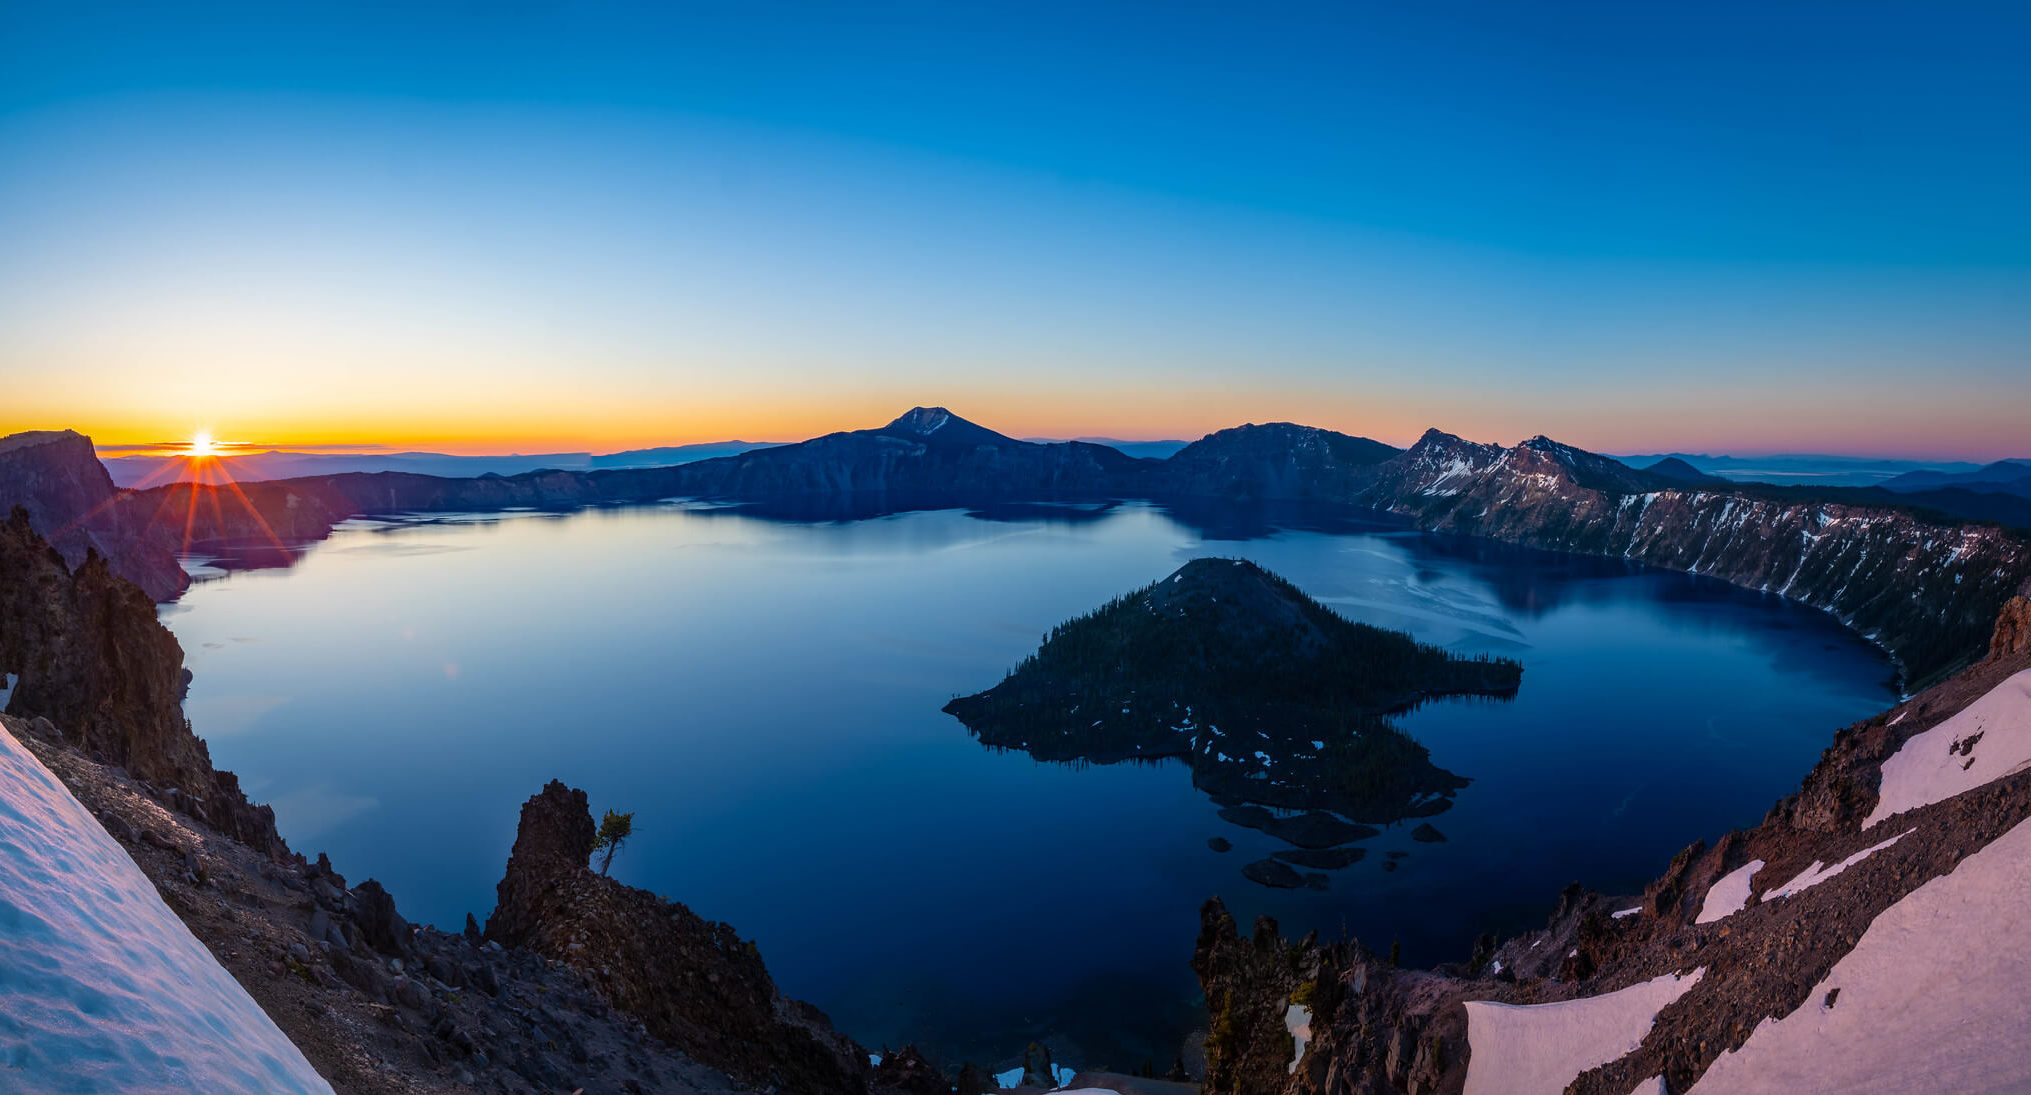 View from Crater Lake